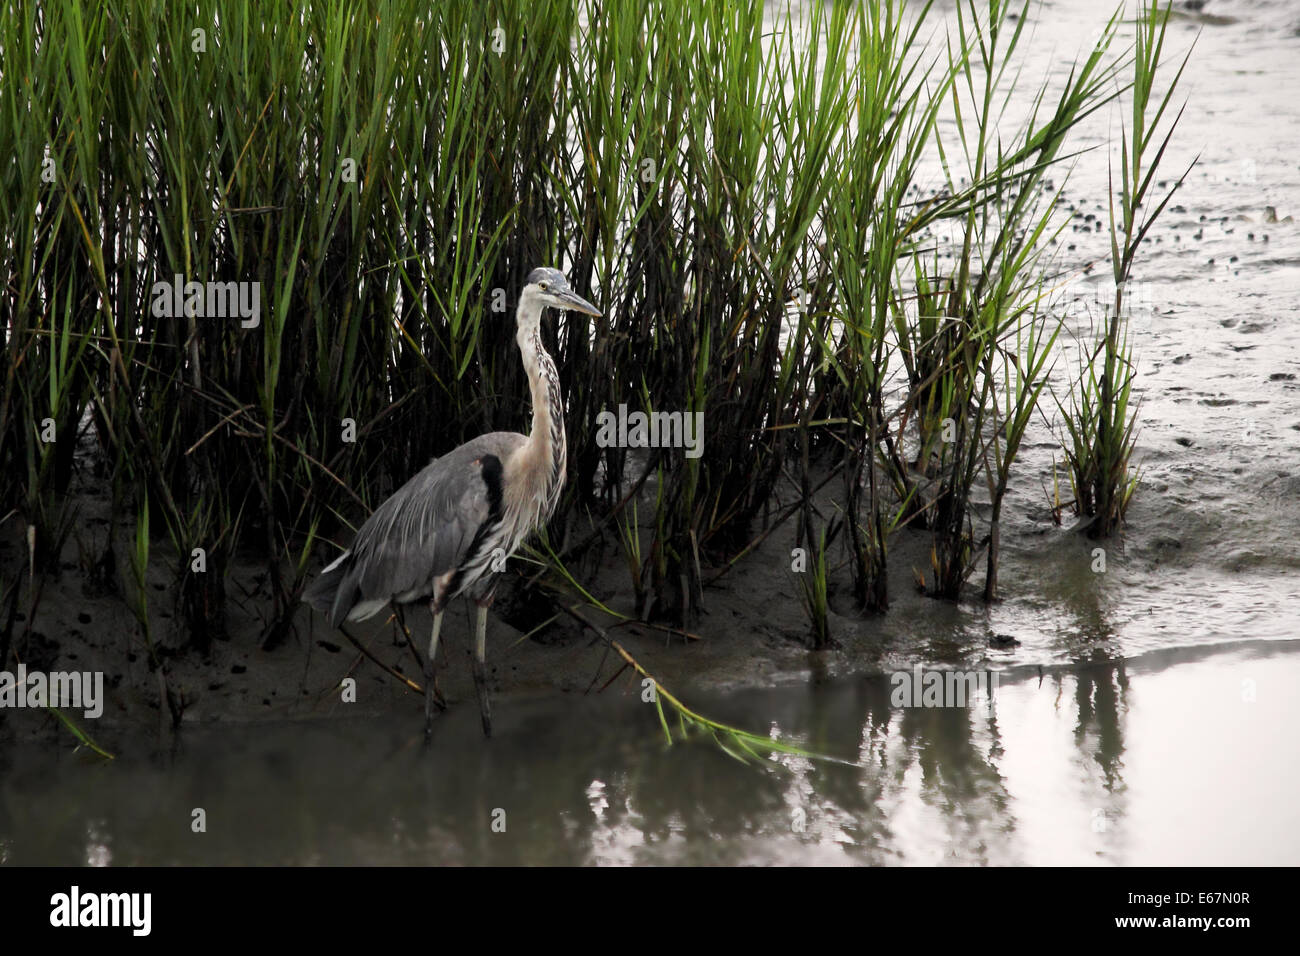 A Great blue heron stands among the spartina grass in a coastal wetland. Stock Photo